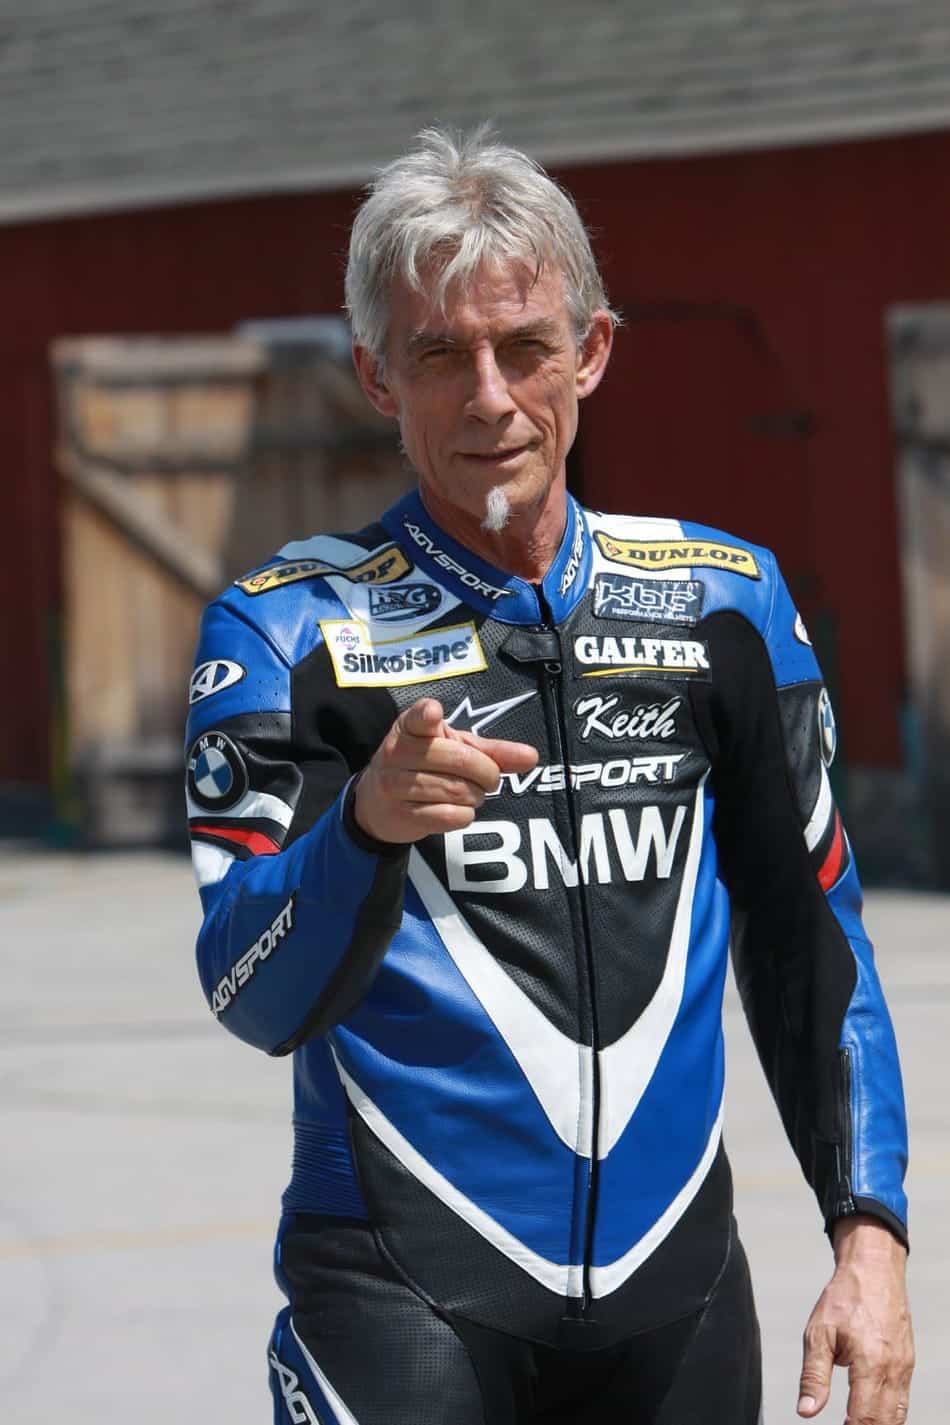 Keith-Code-founder-of-the-California-Superbike-School-AGVSPORT-leathers-1